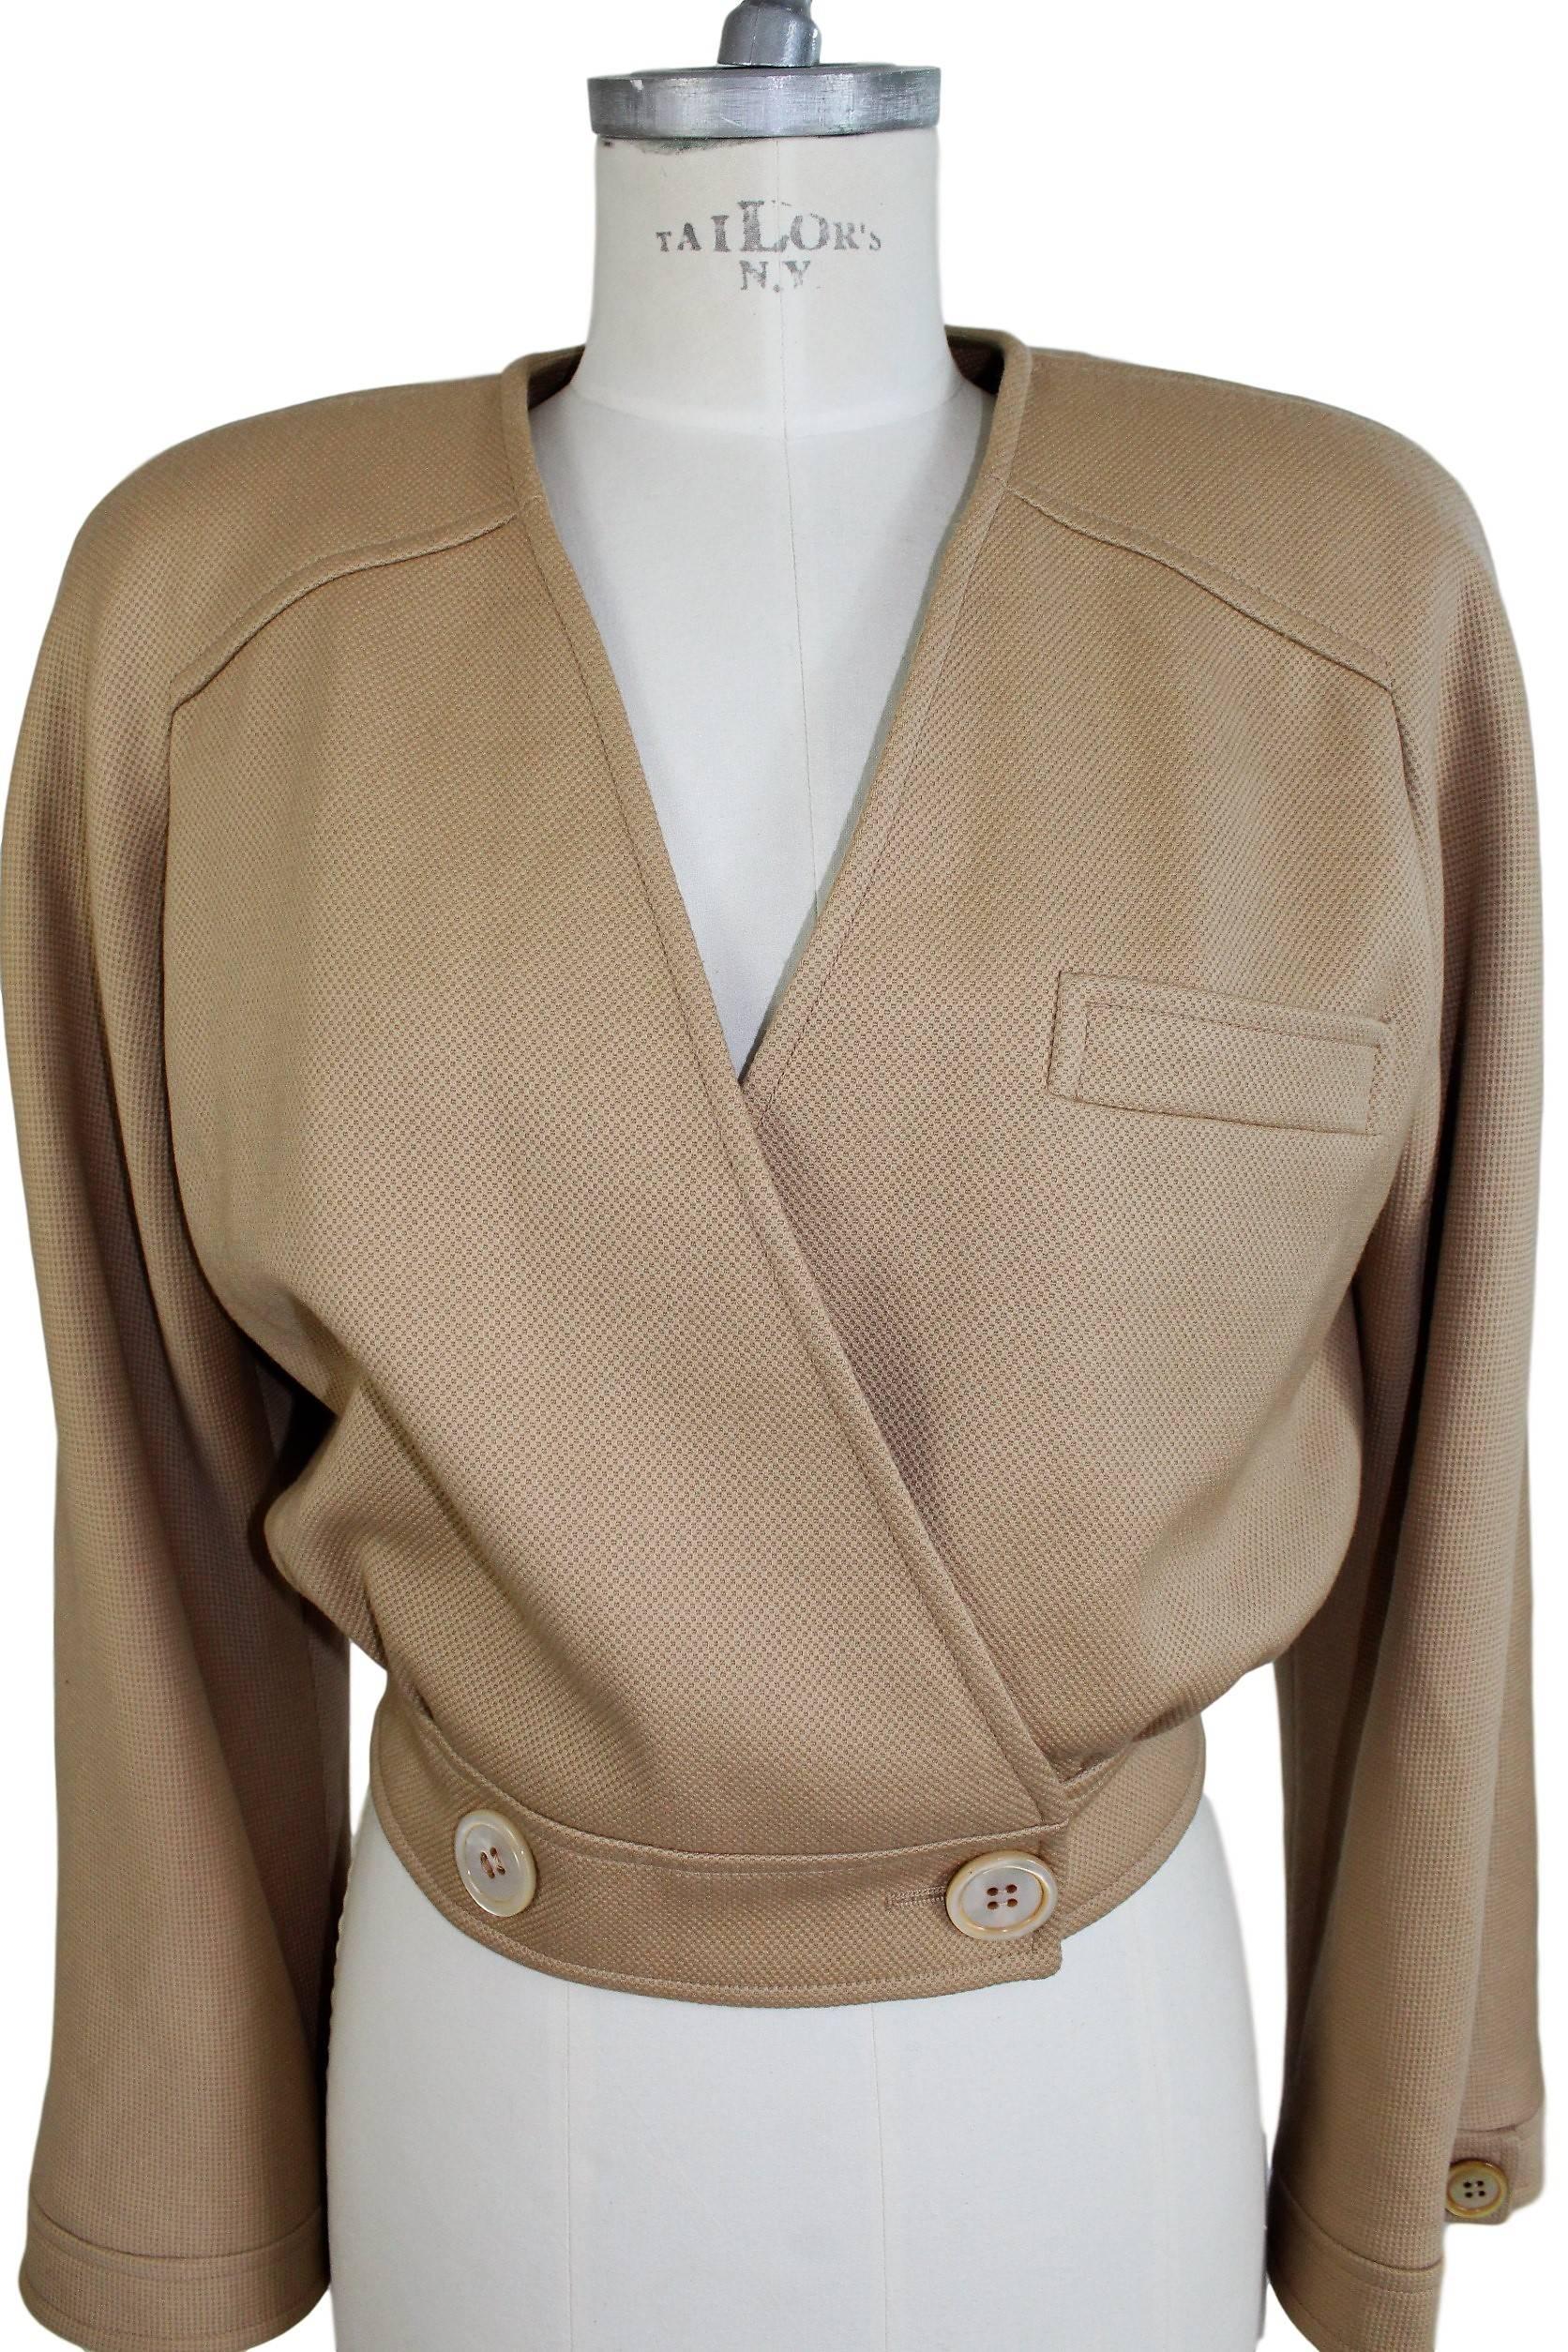 Jacket Vintage Valentino Boutique 1980s. The jacket is short in waist, beige heavy cotton. Nice texture in relief. Mother pearl buttons, front pocket.

Size 8 UK

Measures
Shoulder: 40  cm
Armpit to Armpit: 46 cm
Sleeve: 57 cm
Length: 50